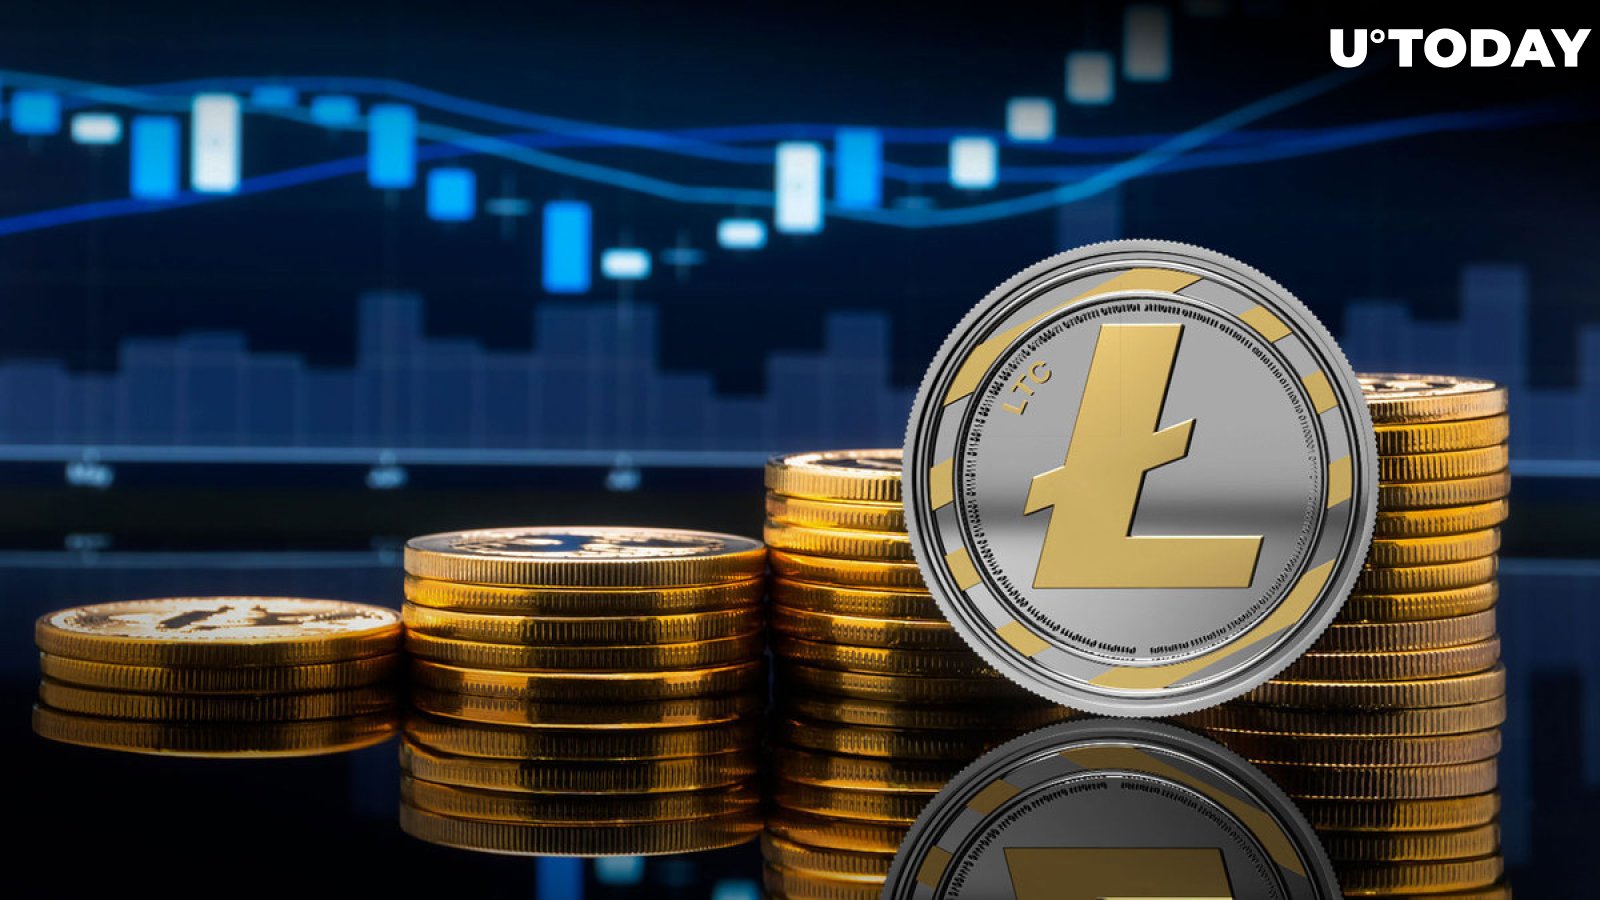 Litecoin (LTC) dusts off BTC, ETH and DOGE as a payment protocol